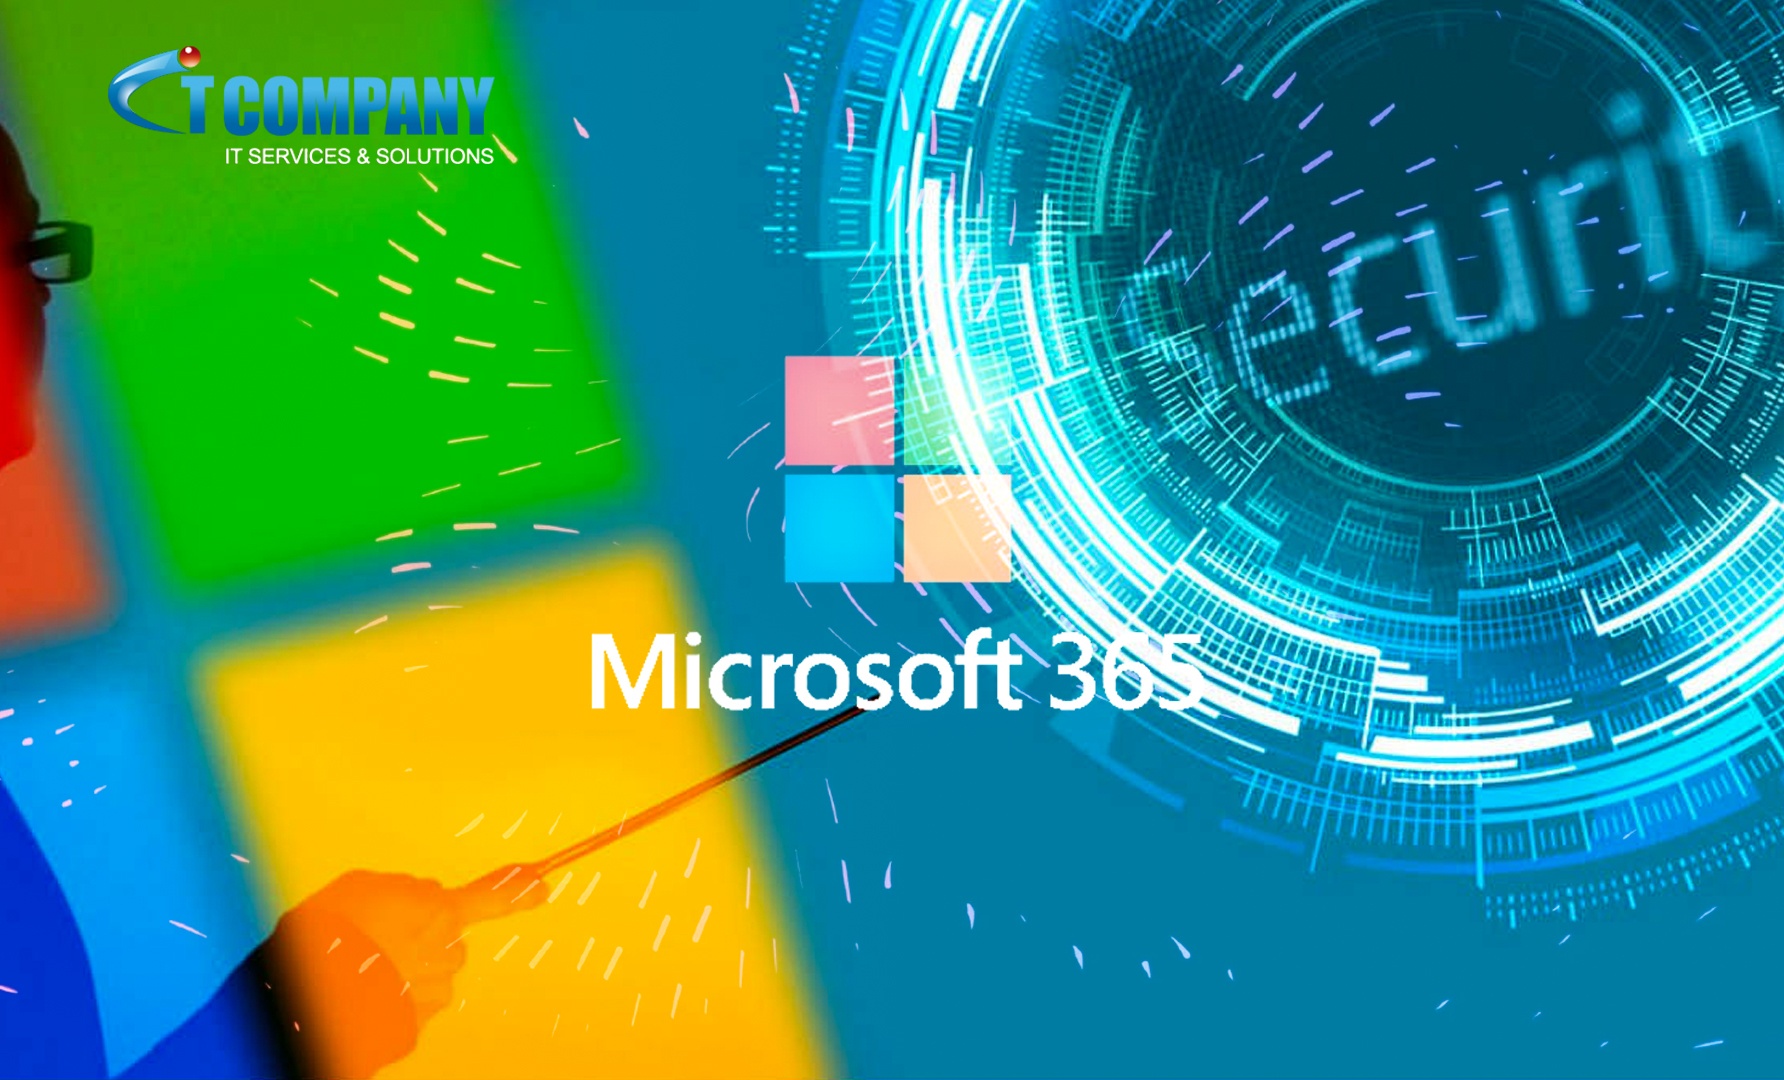 A Microsoft 365 bug discovery can help you earn extra money